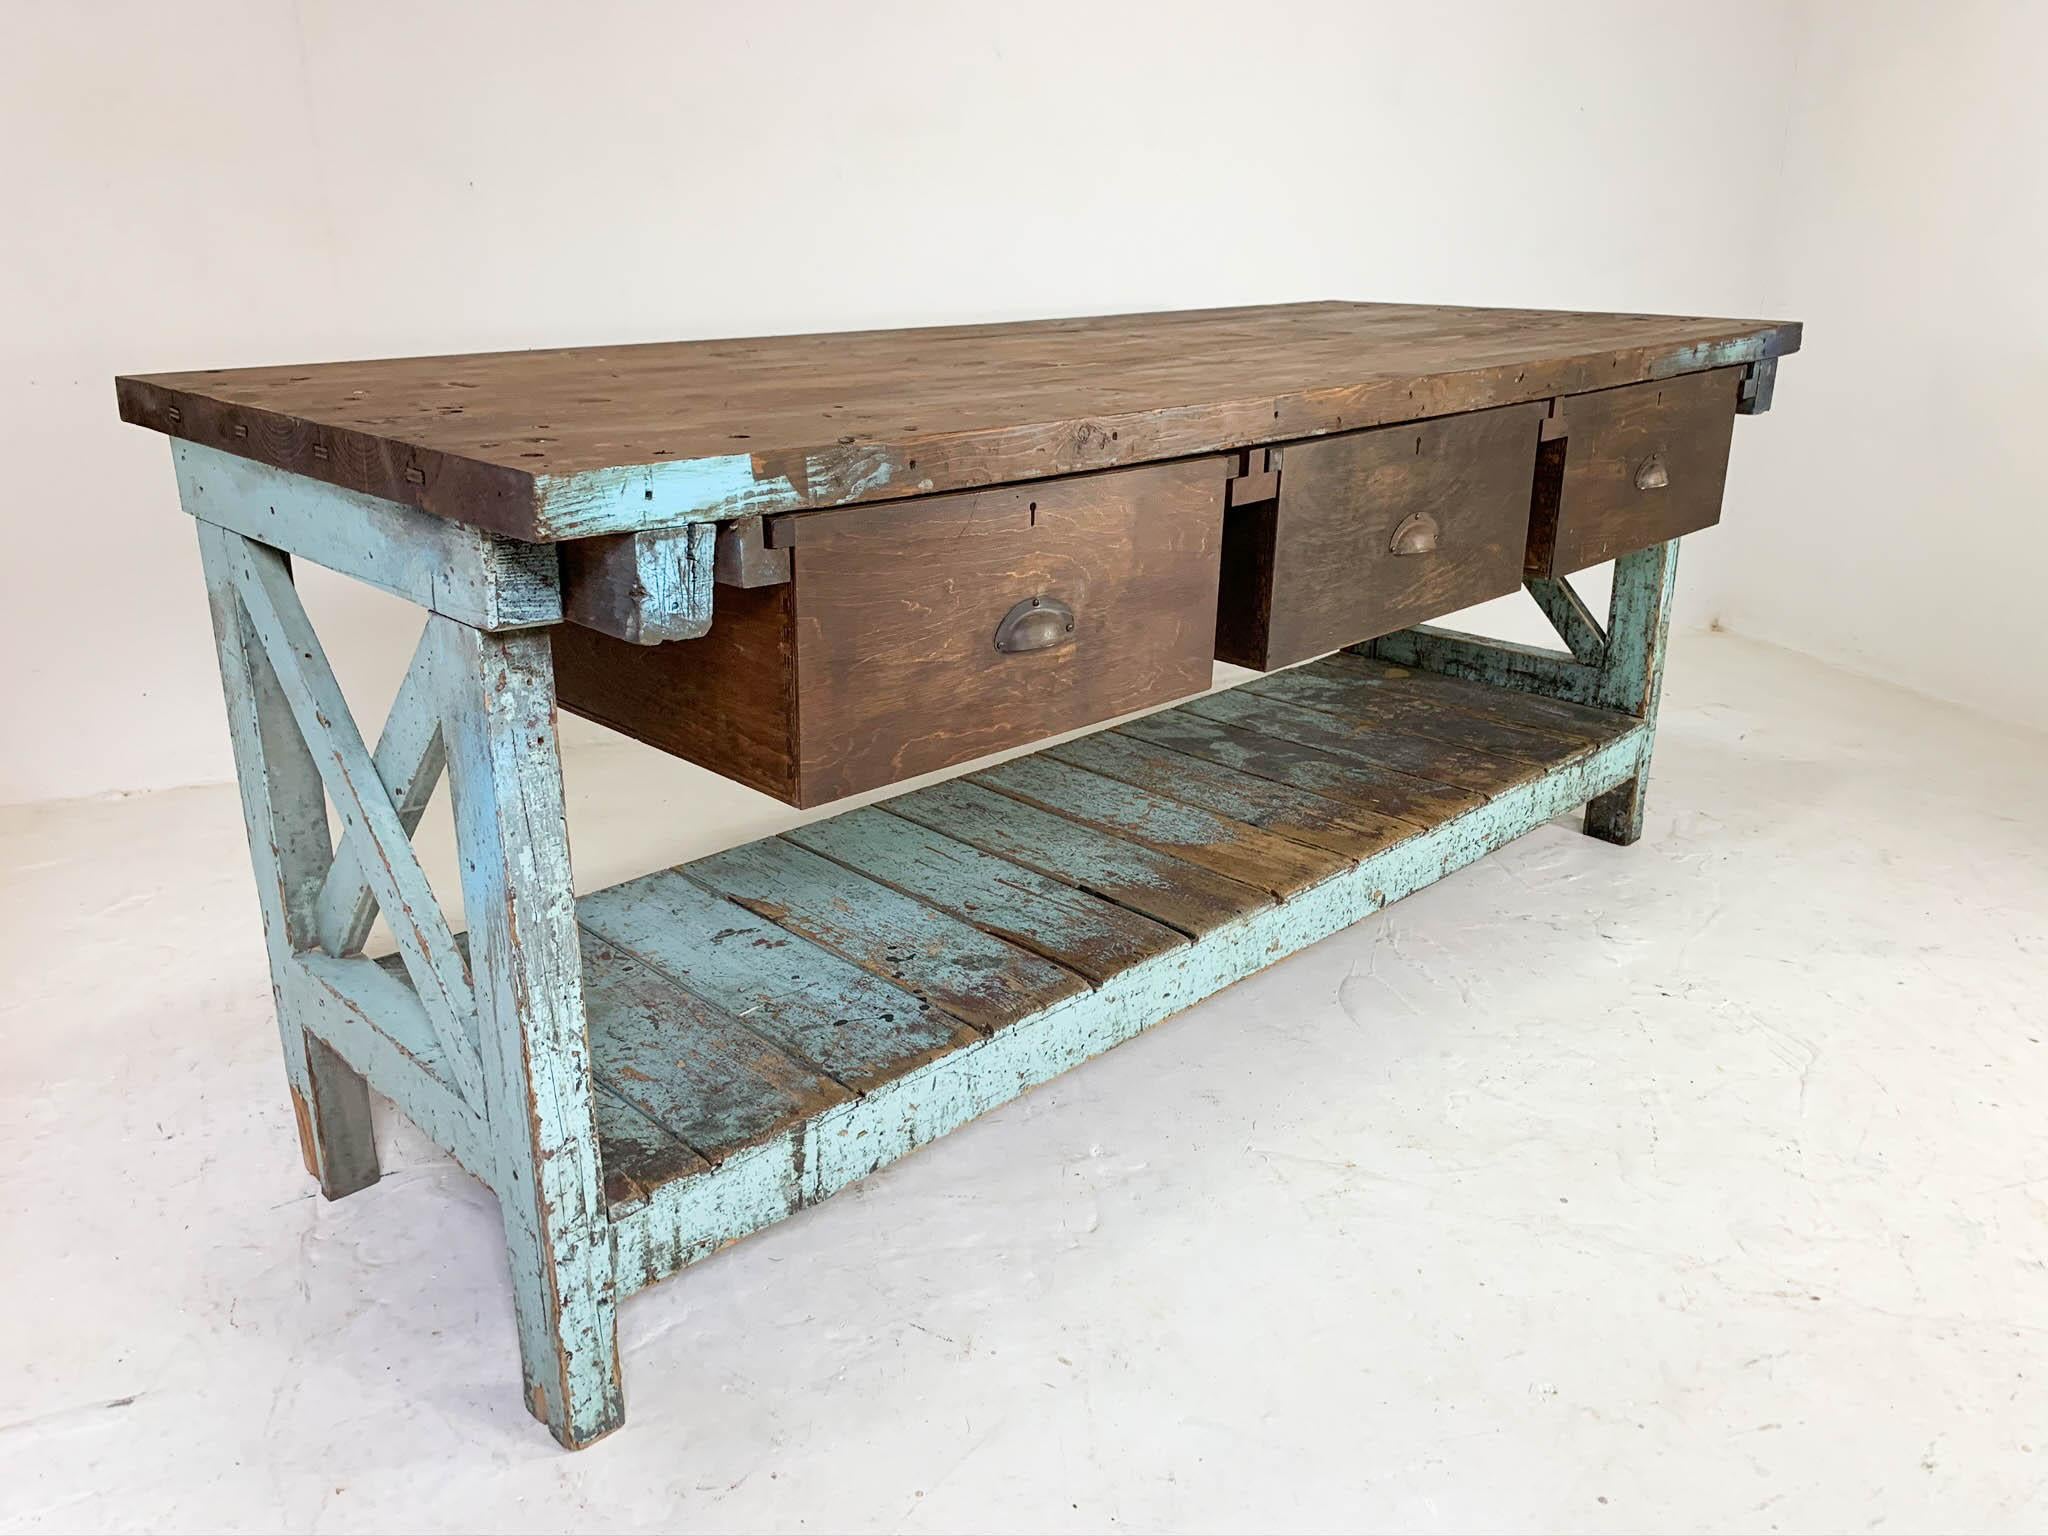 Vintage English workbench dating from the 1950s, sourced from a steel factory in Sheffield. It has all original parts: three large deep drawers with cup handles, potting board shelf below which provides great storage for larger items and original